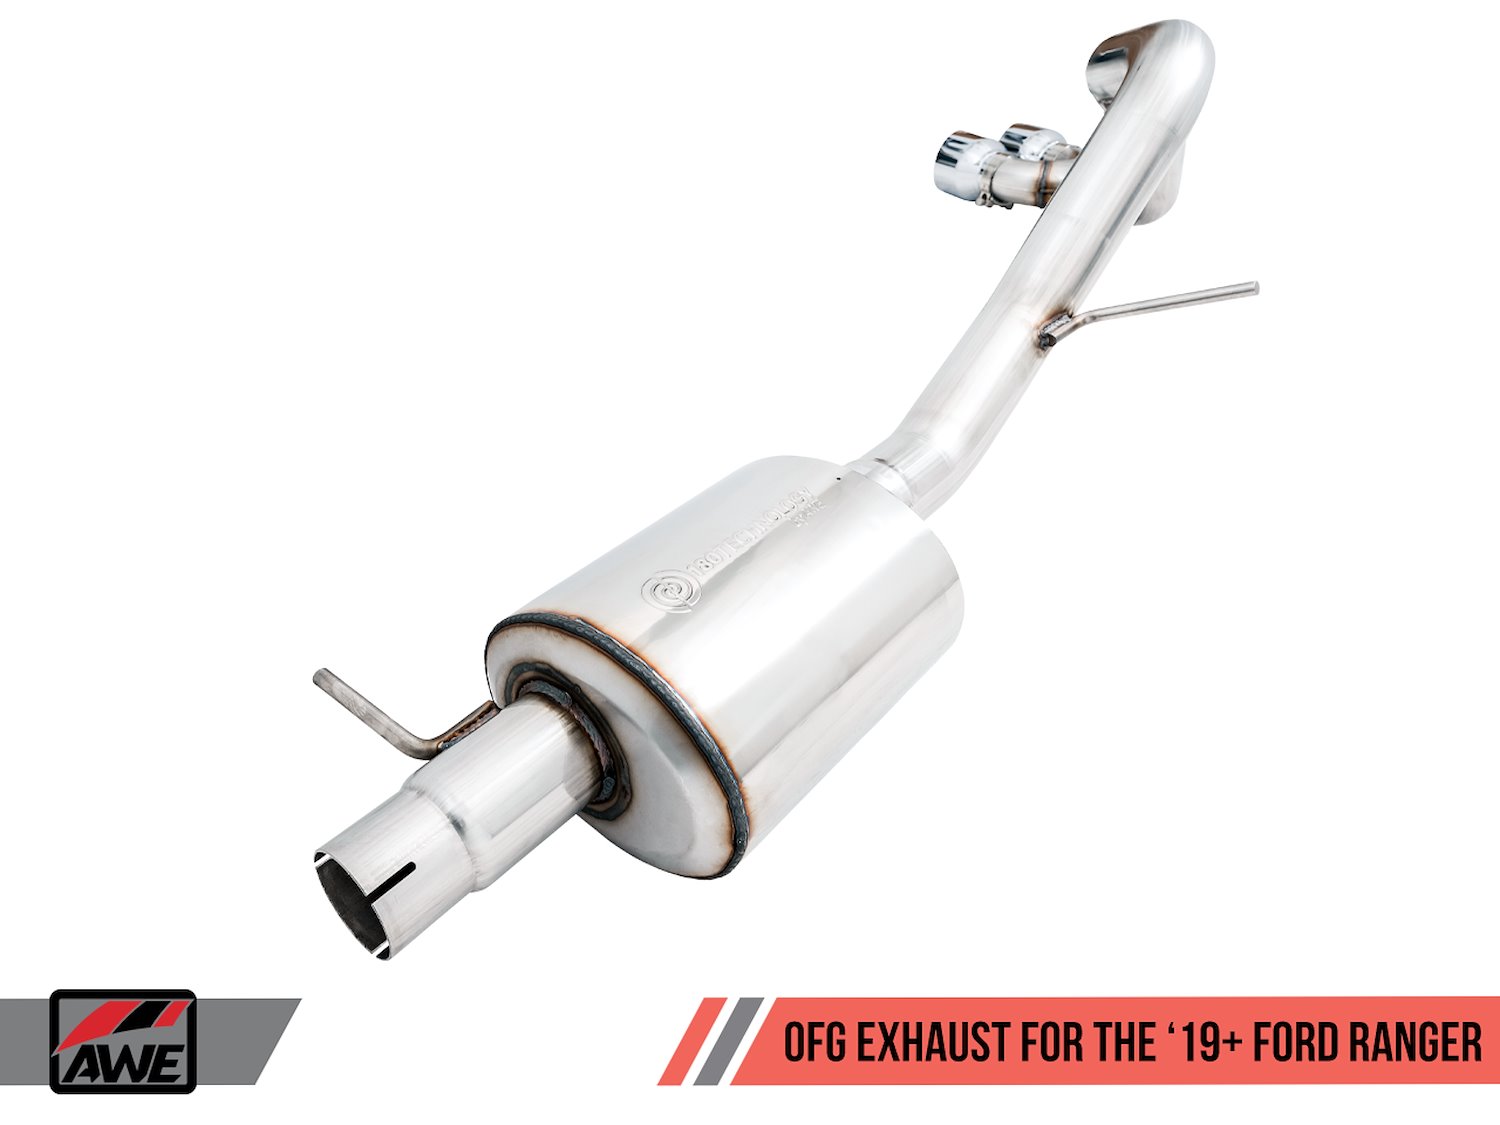 0FG Exhaust with BashGuard for Ford Ranger - Dual Chrome Silver Tips